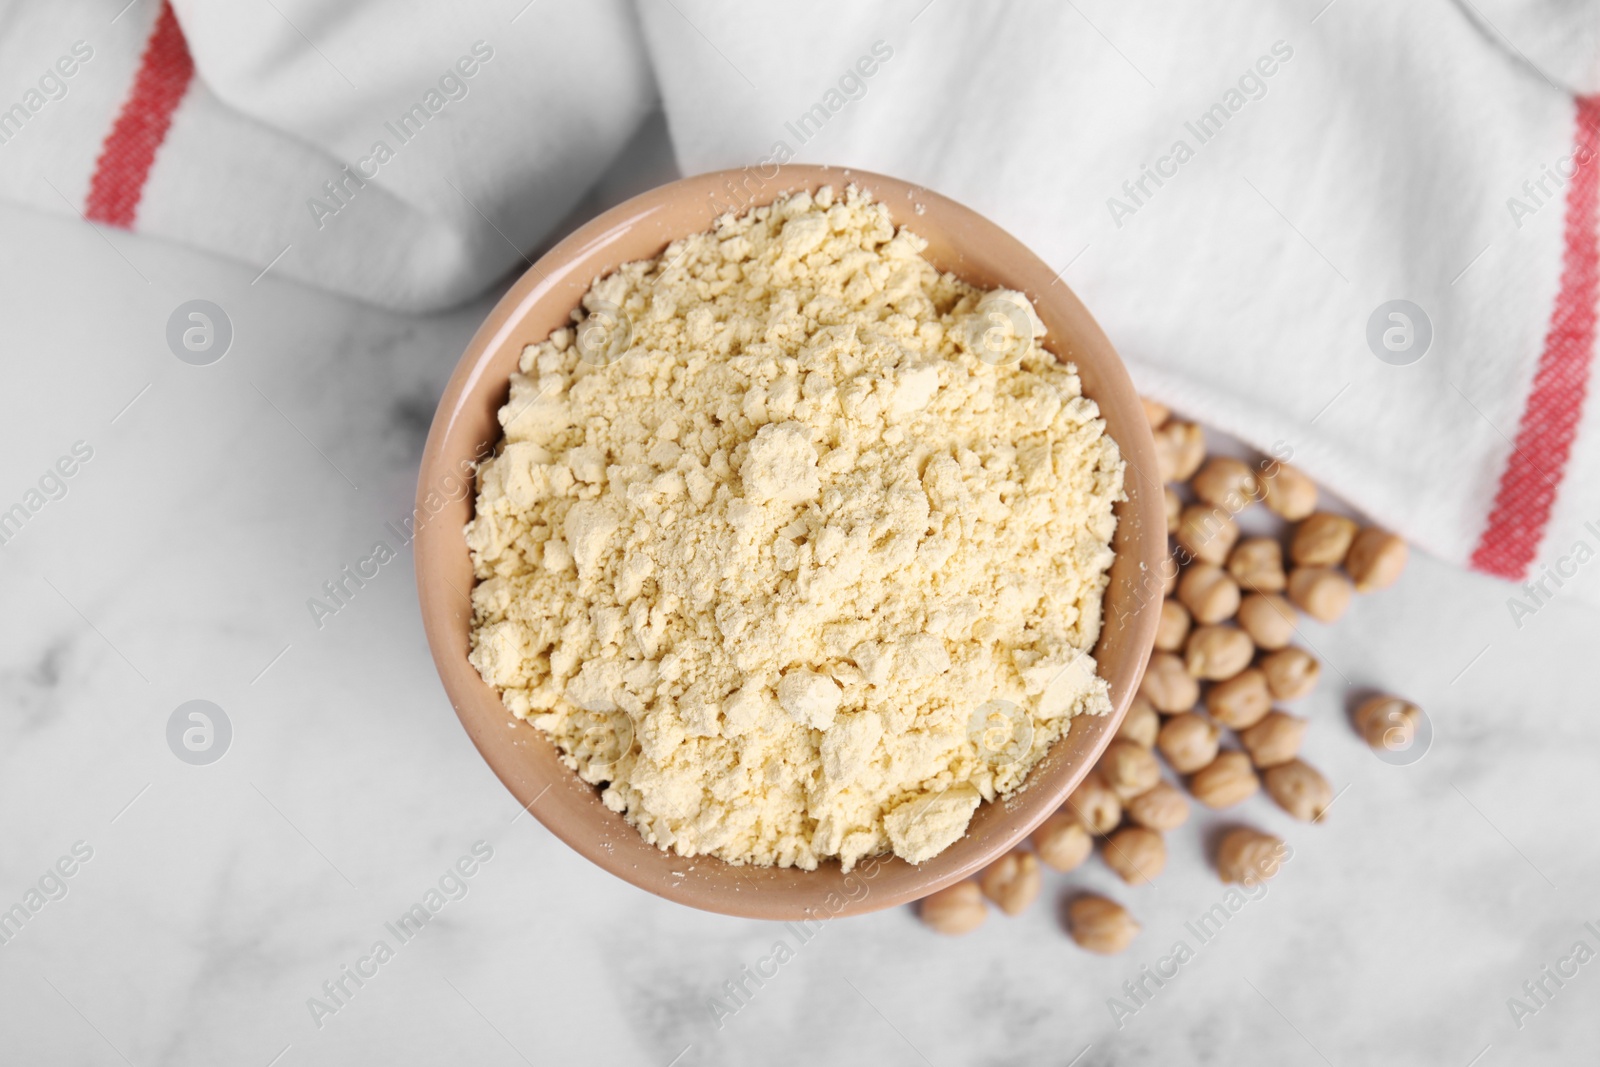 Photo of Chickpea flour in bowl and seeds on white marble table, top view